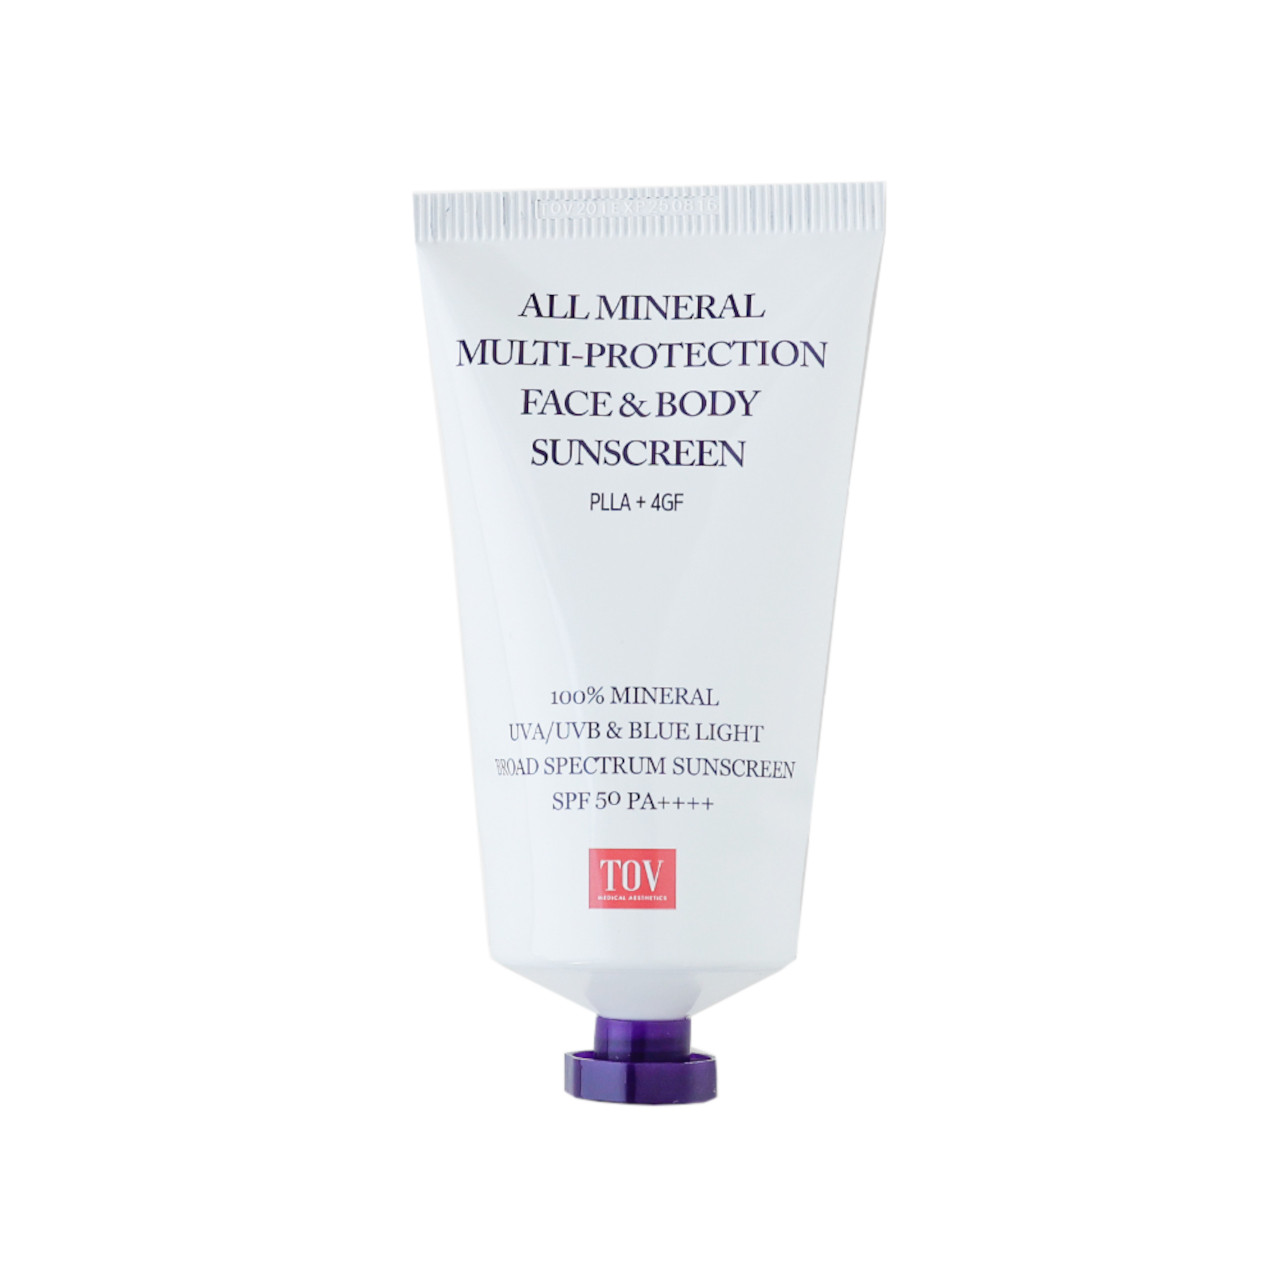 House of PLLA HOP+ All Mineral Multi-Protection Face & Body Sunscreen